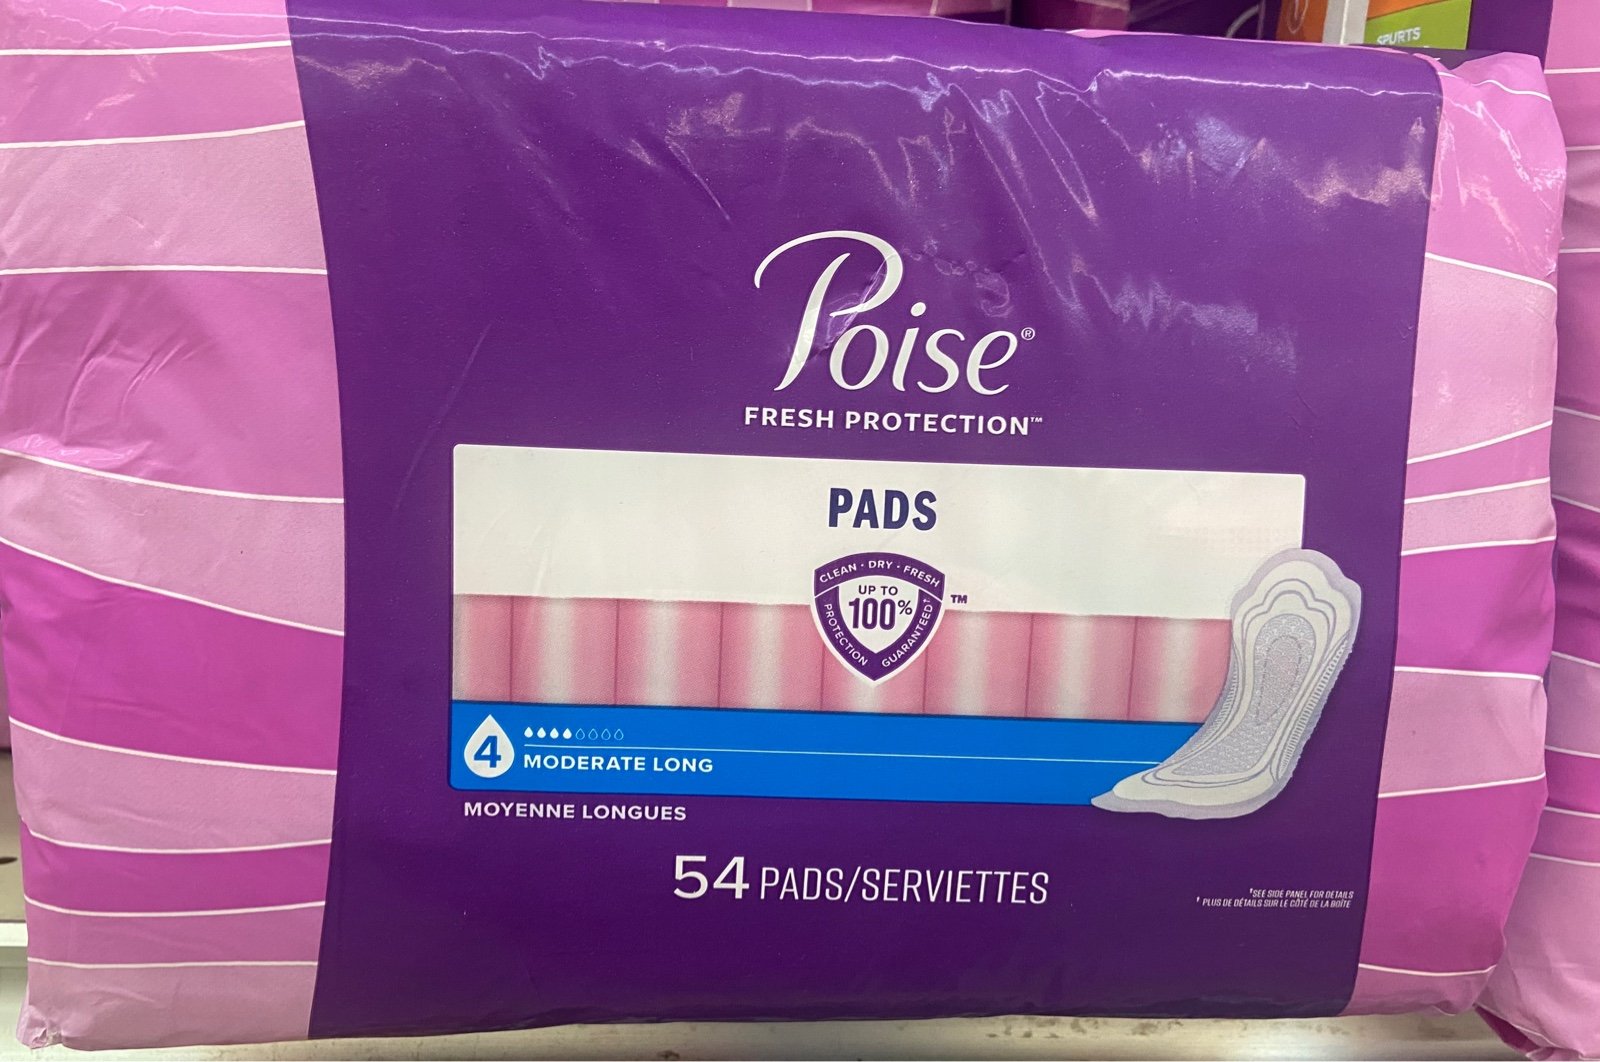 Poise Pads 7xcLizvBF